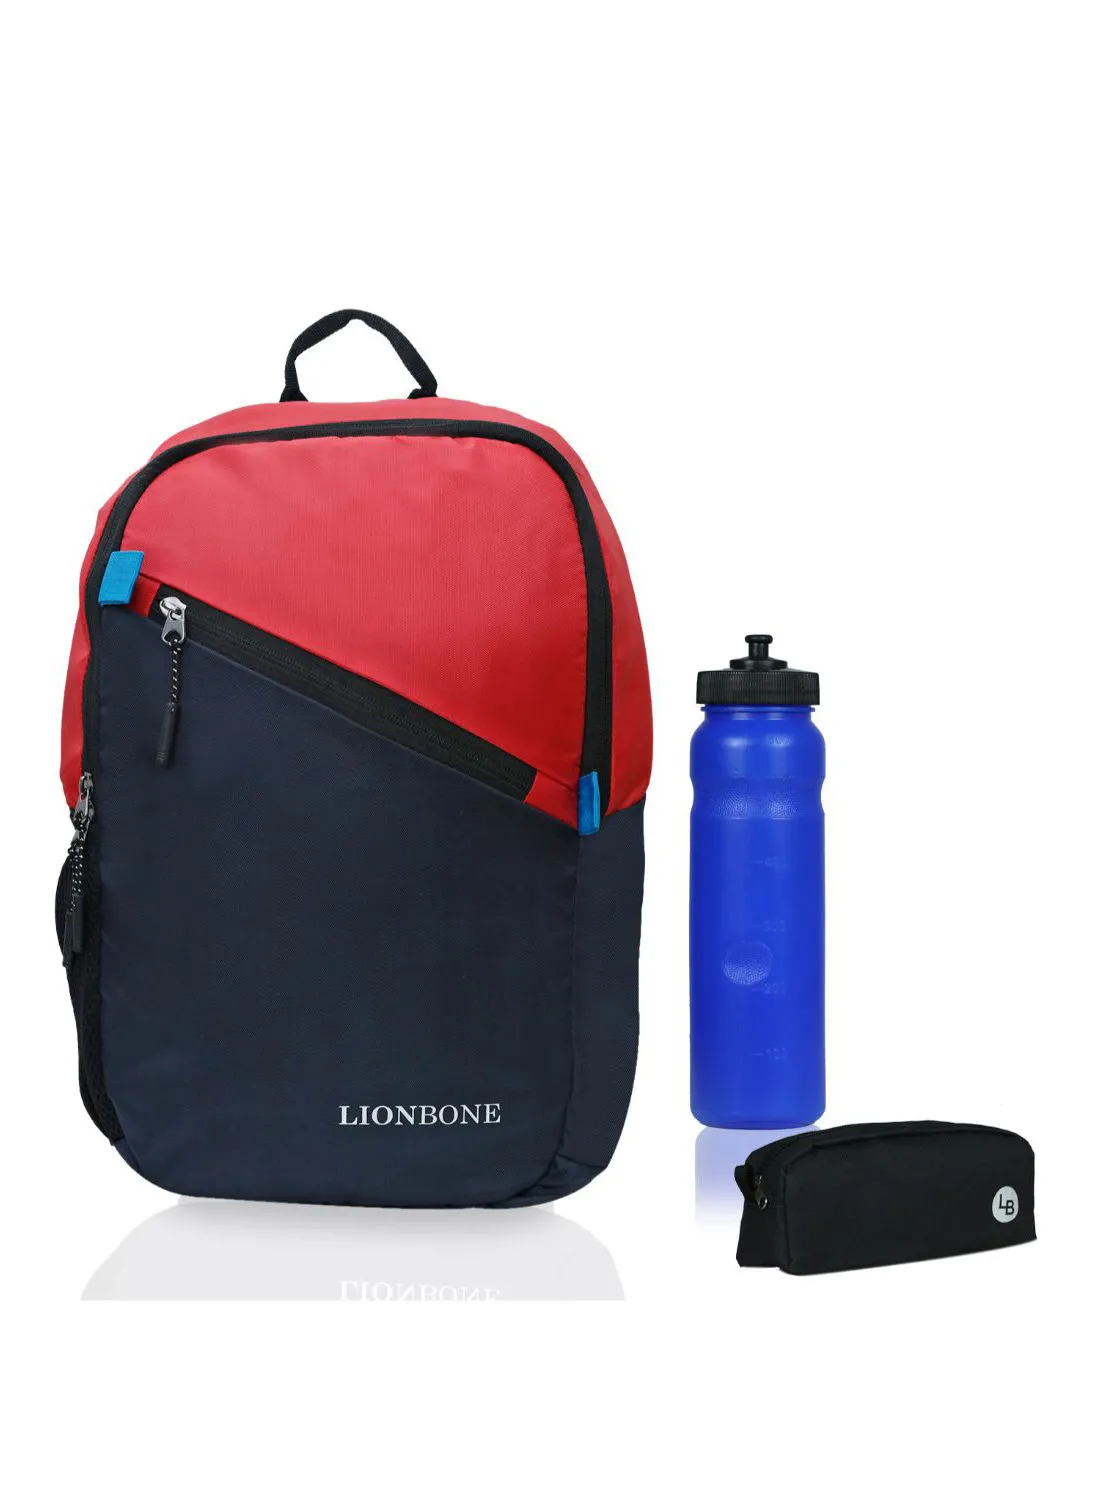 LIONBONE Logo Printed Polyester Backpack with zip closure compatible with 13' Laptop, Plastic Sipper And Polyester Pouch Red//Black/Blue